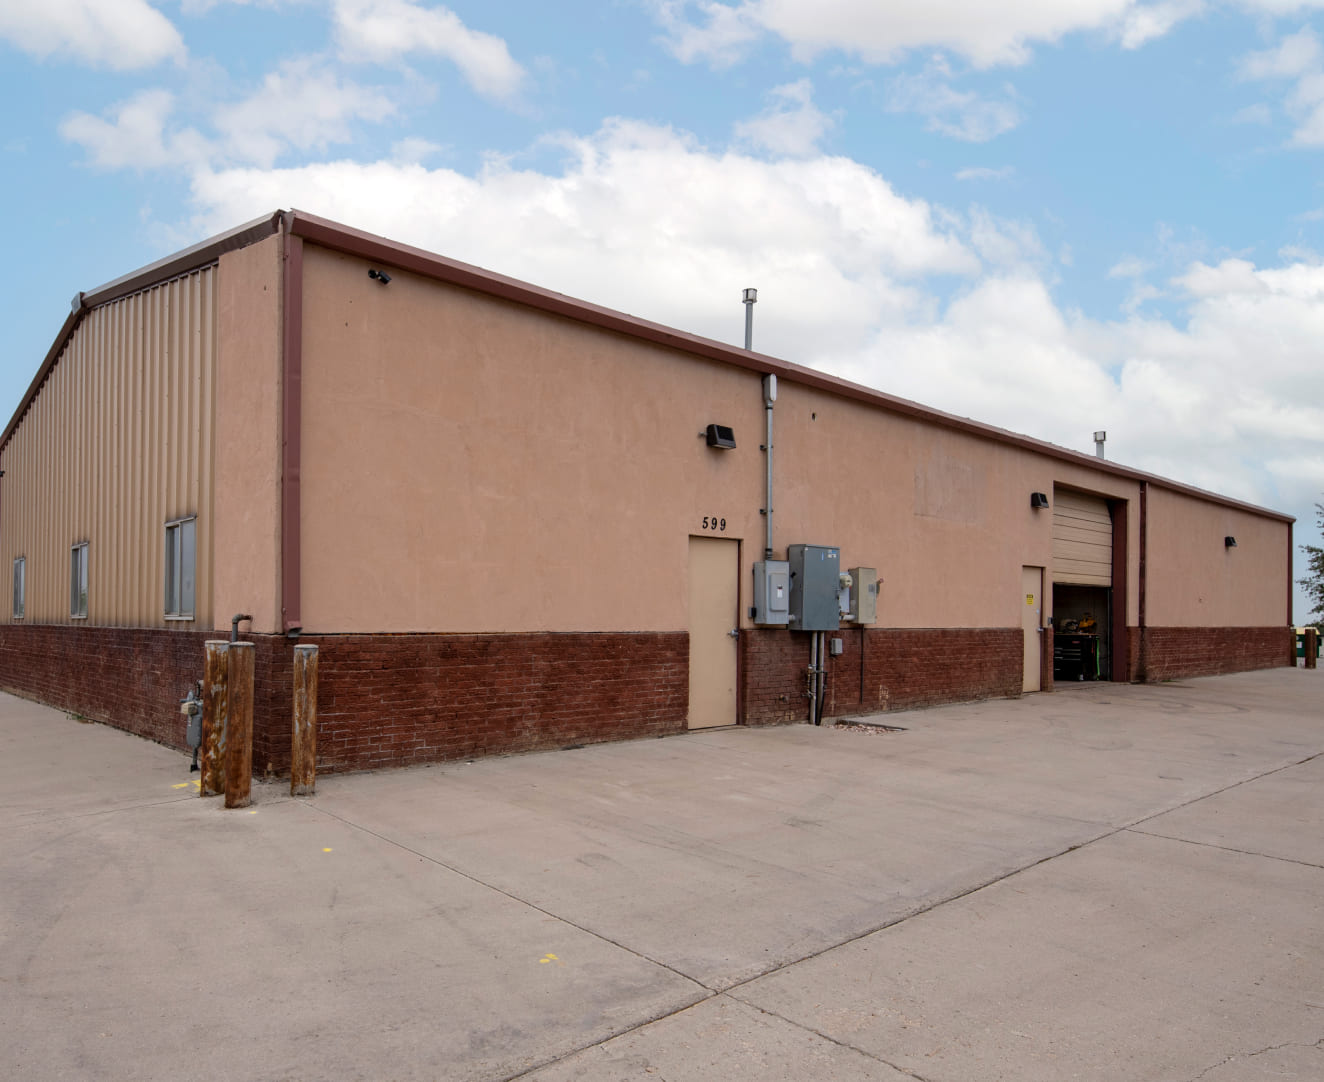 Two doors and a garage door of the industrial property located at 599 71st Street in Loveland, CO.